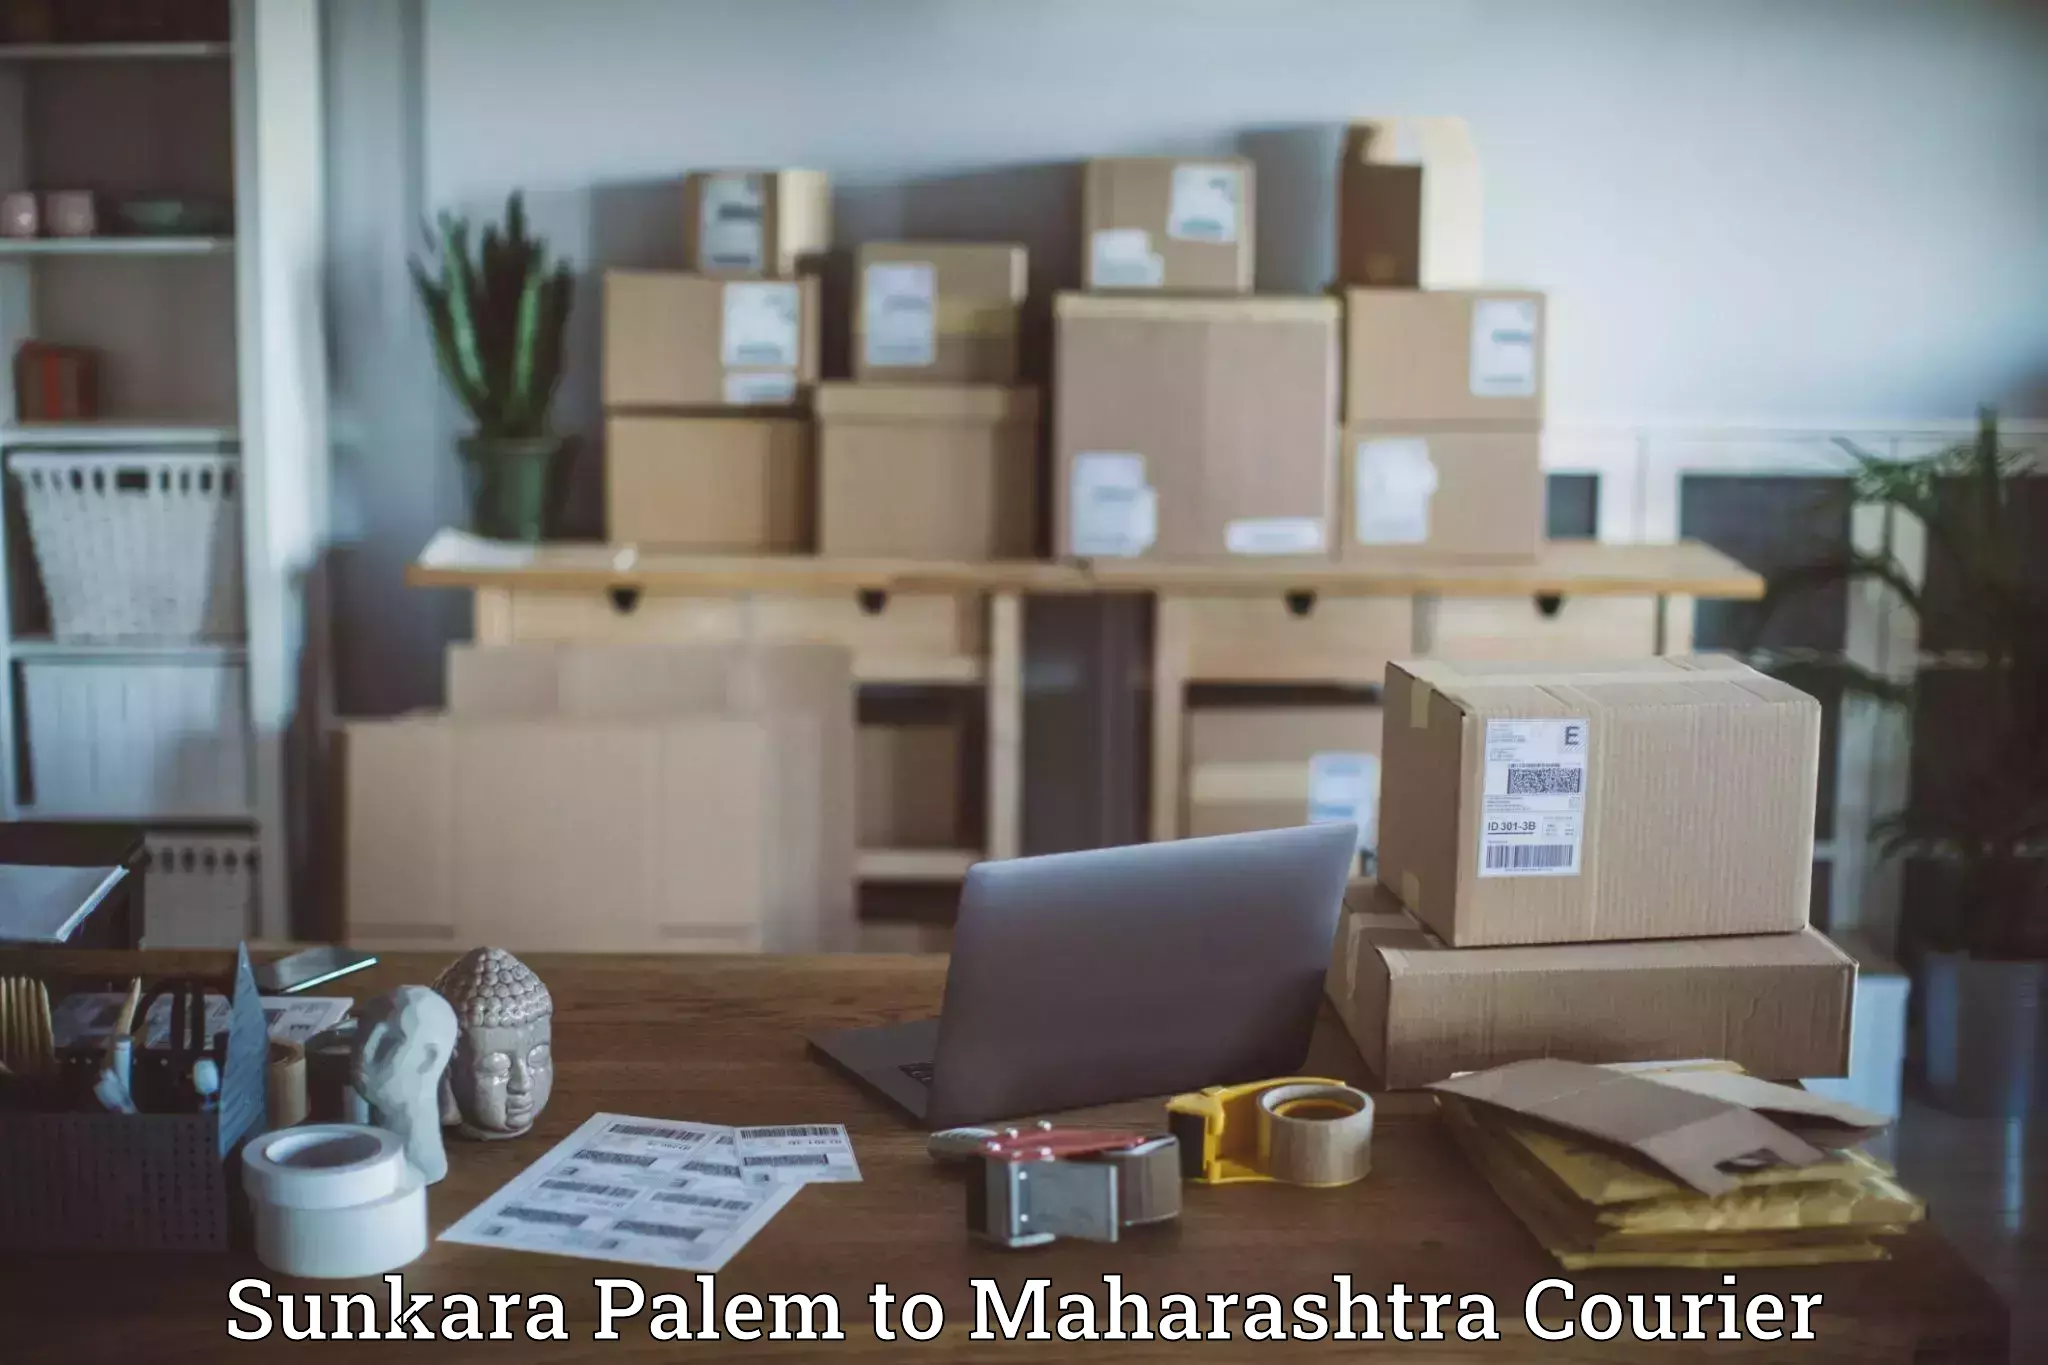 High-quality delivery services in Sunkara Palem to Andheri